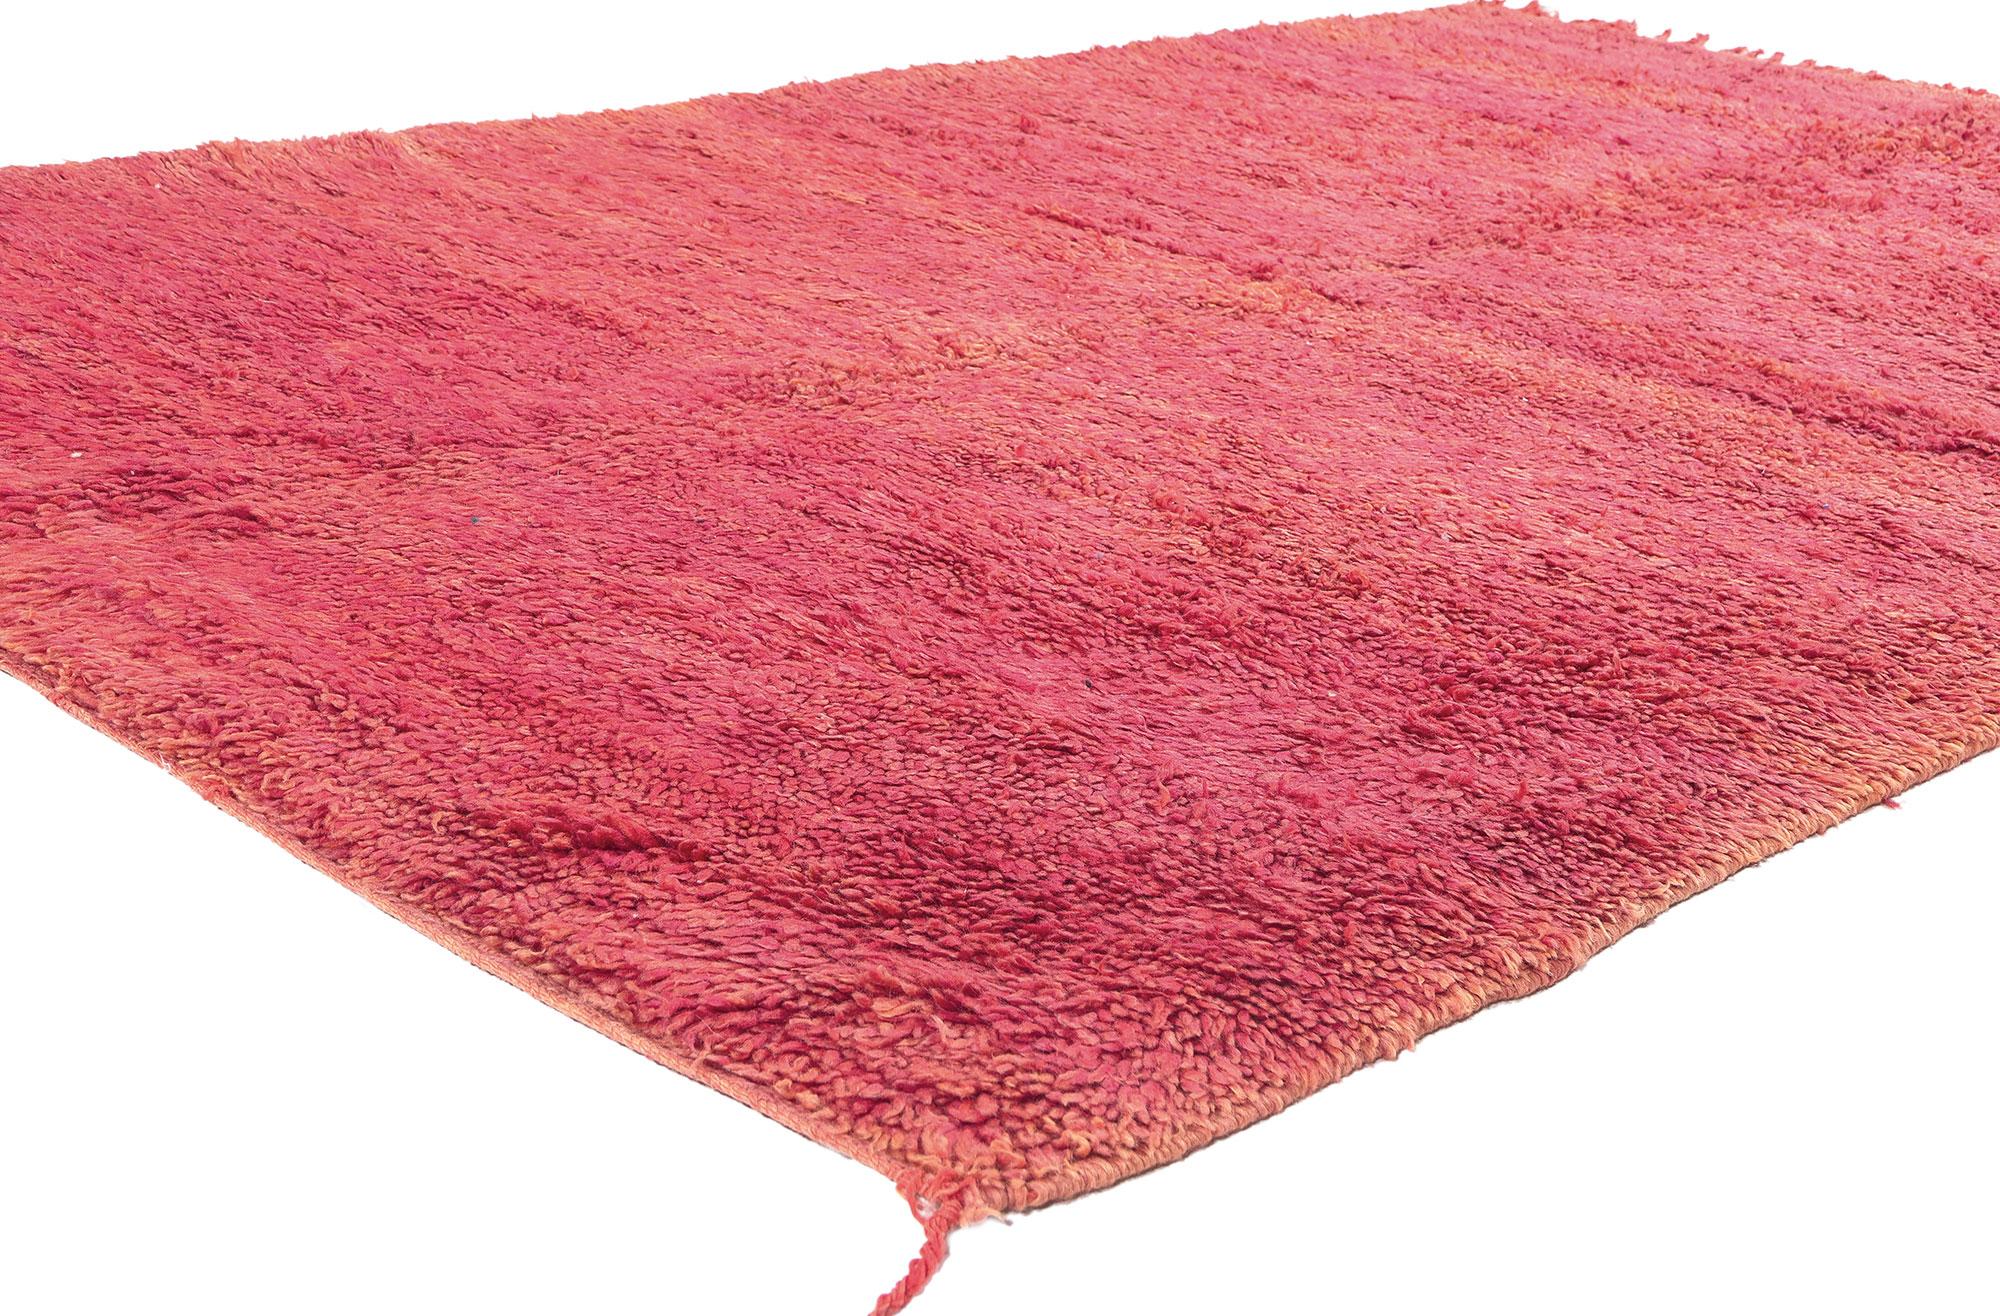 20950 Vintage Pink Boujad Moroccan Rug, 05'09 x 11'08. 

Originating from the vibrant city of Boujad, known for its eccentric and artistic designs, this vintage Boujad Moroccan rug transcends visual appaeal. Step into the embrace of a cozy nomad,